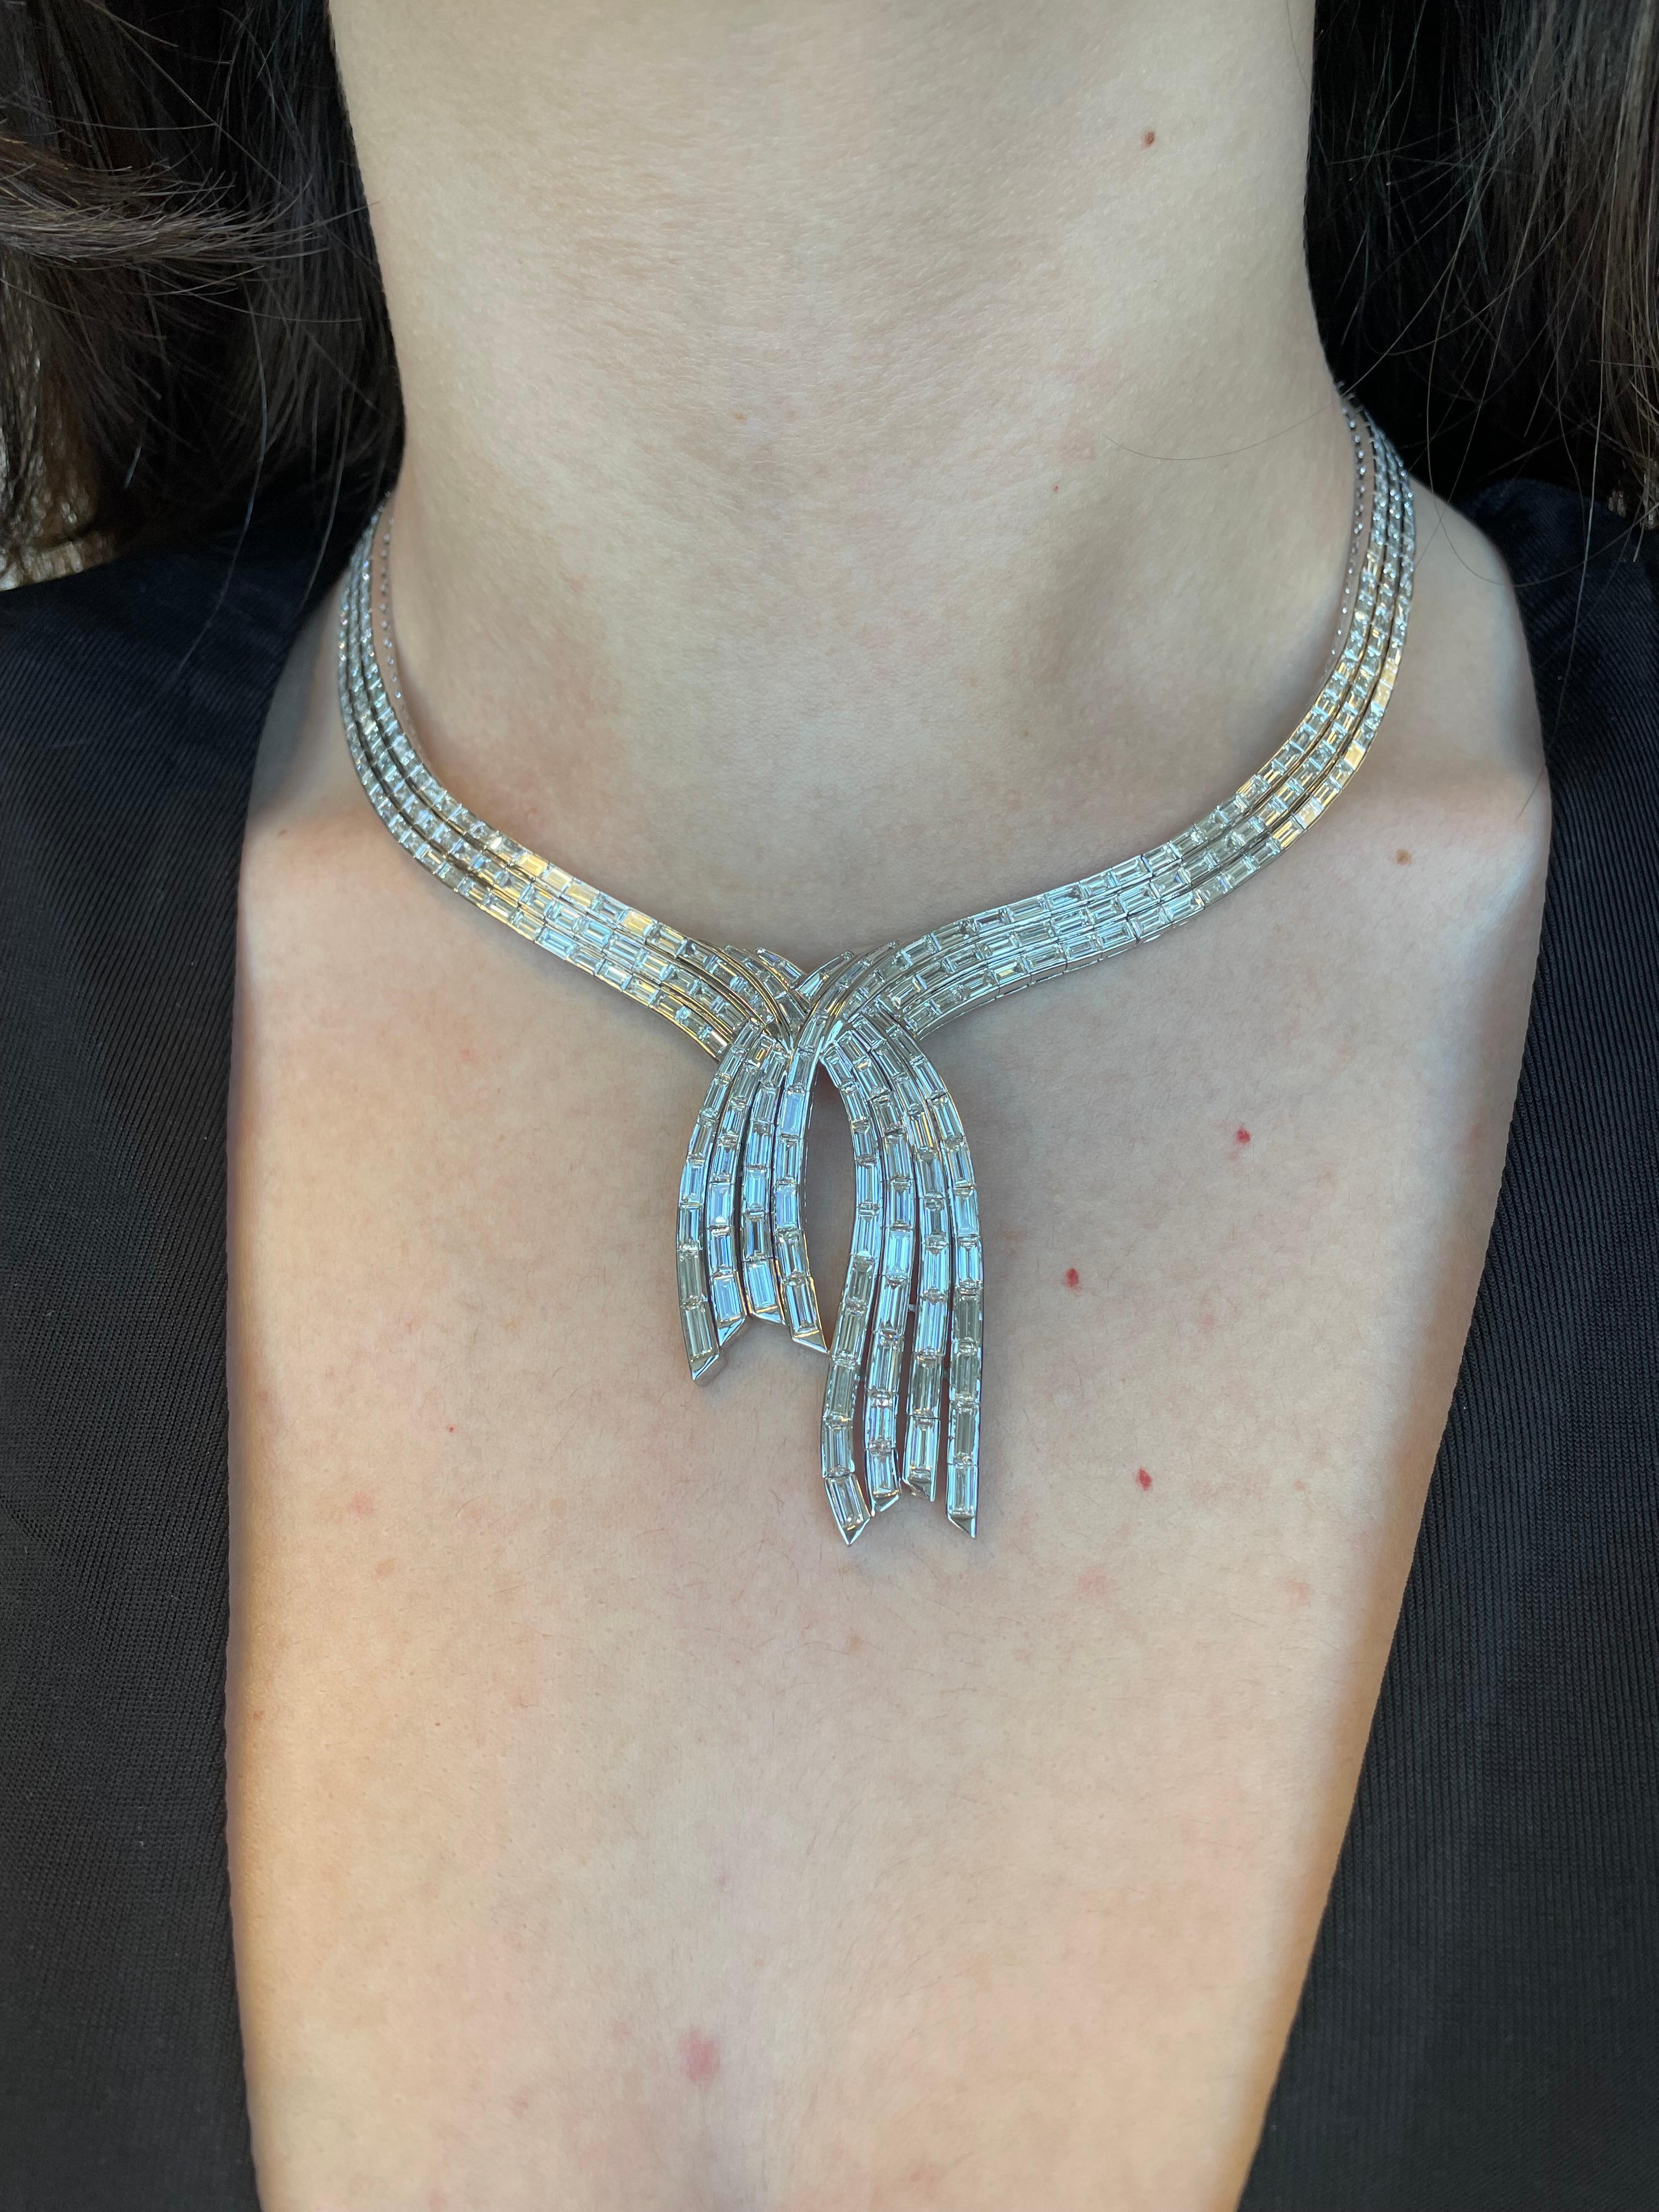 Glamorous baguette cut diamond necklace. High jewelry by Alexander Beverly Hills.
452 baguette cut diamonds, 31.55 carats total. Approximately G/H color and VS clarity. 18k white gold. 
Accommodated with an up-to-date appraisal by a GIA G.G. once